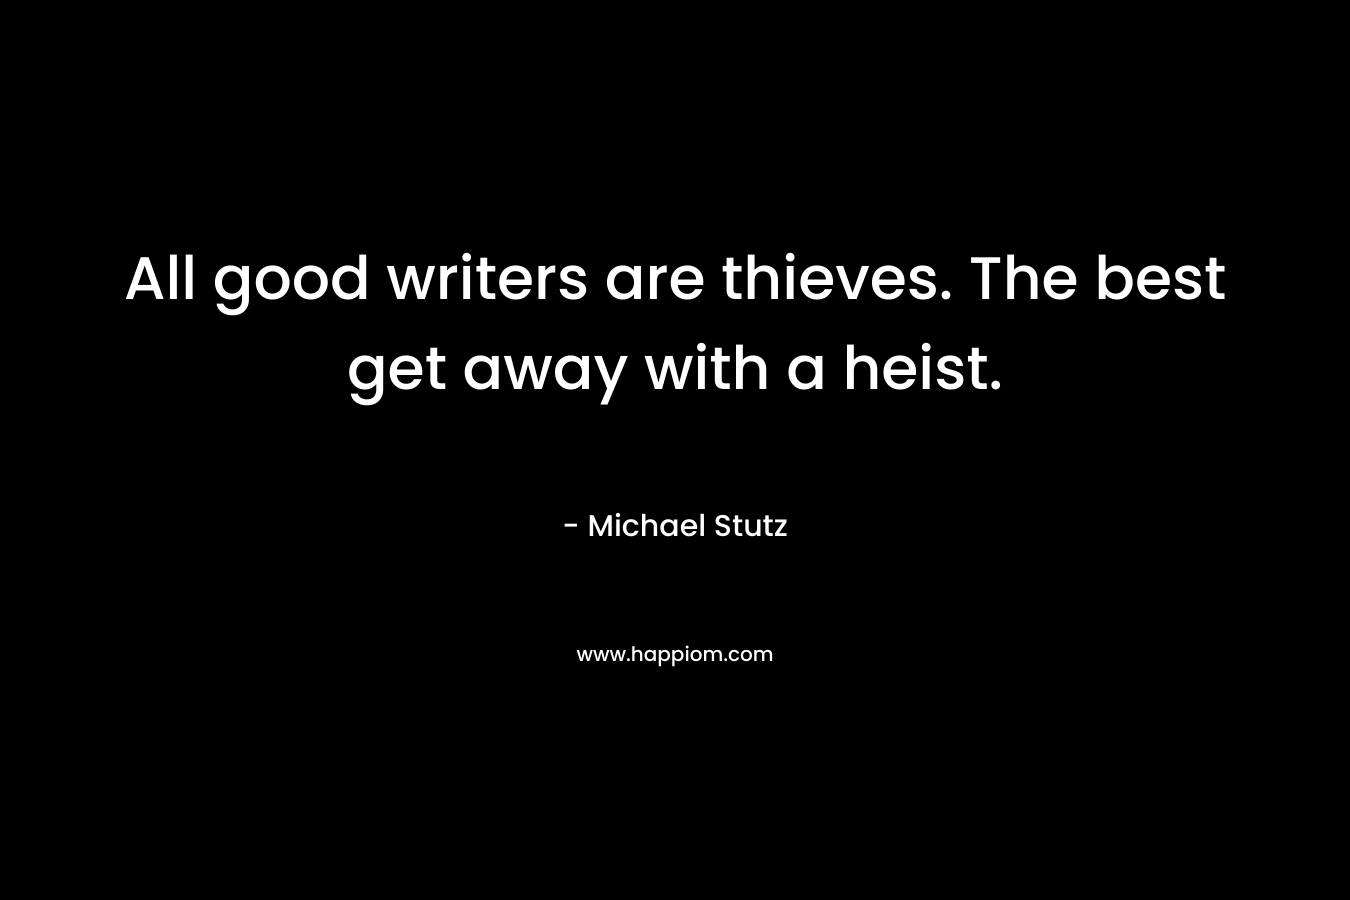 All good writers are thieves. The best get away with a heist. – Michael Stutz